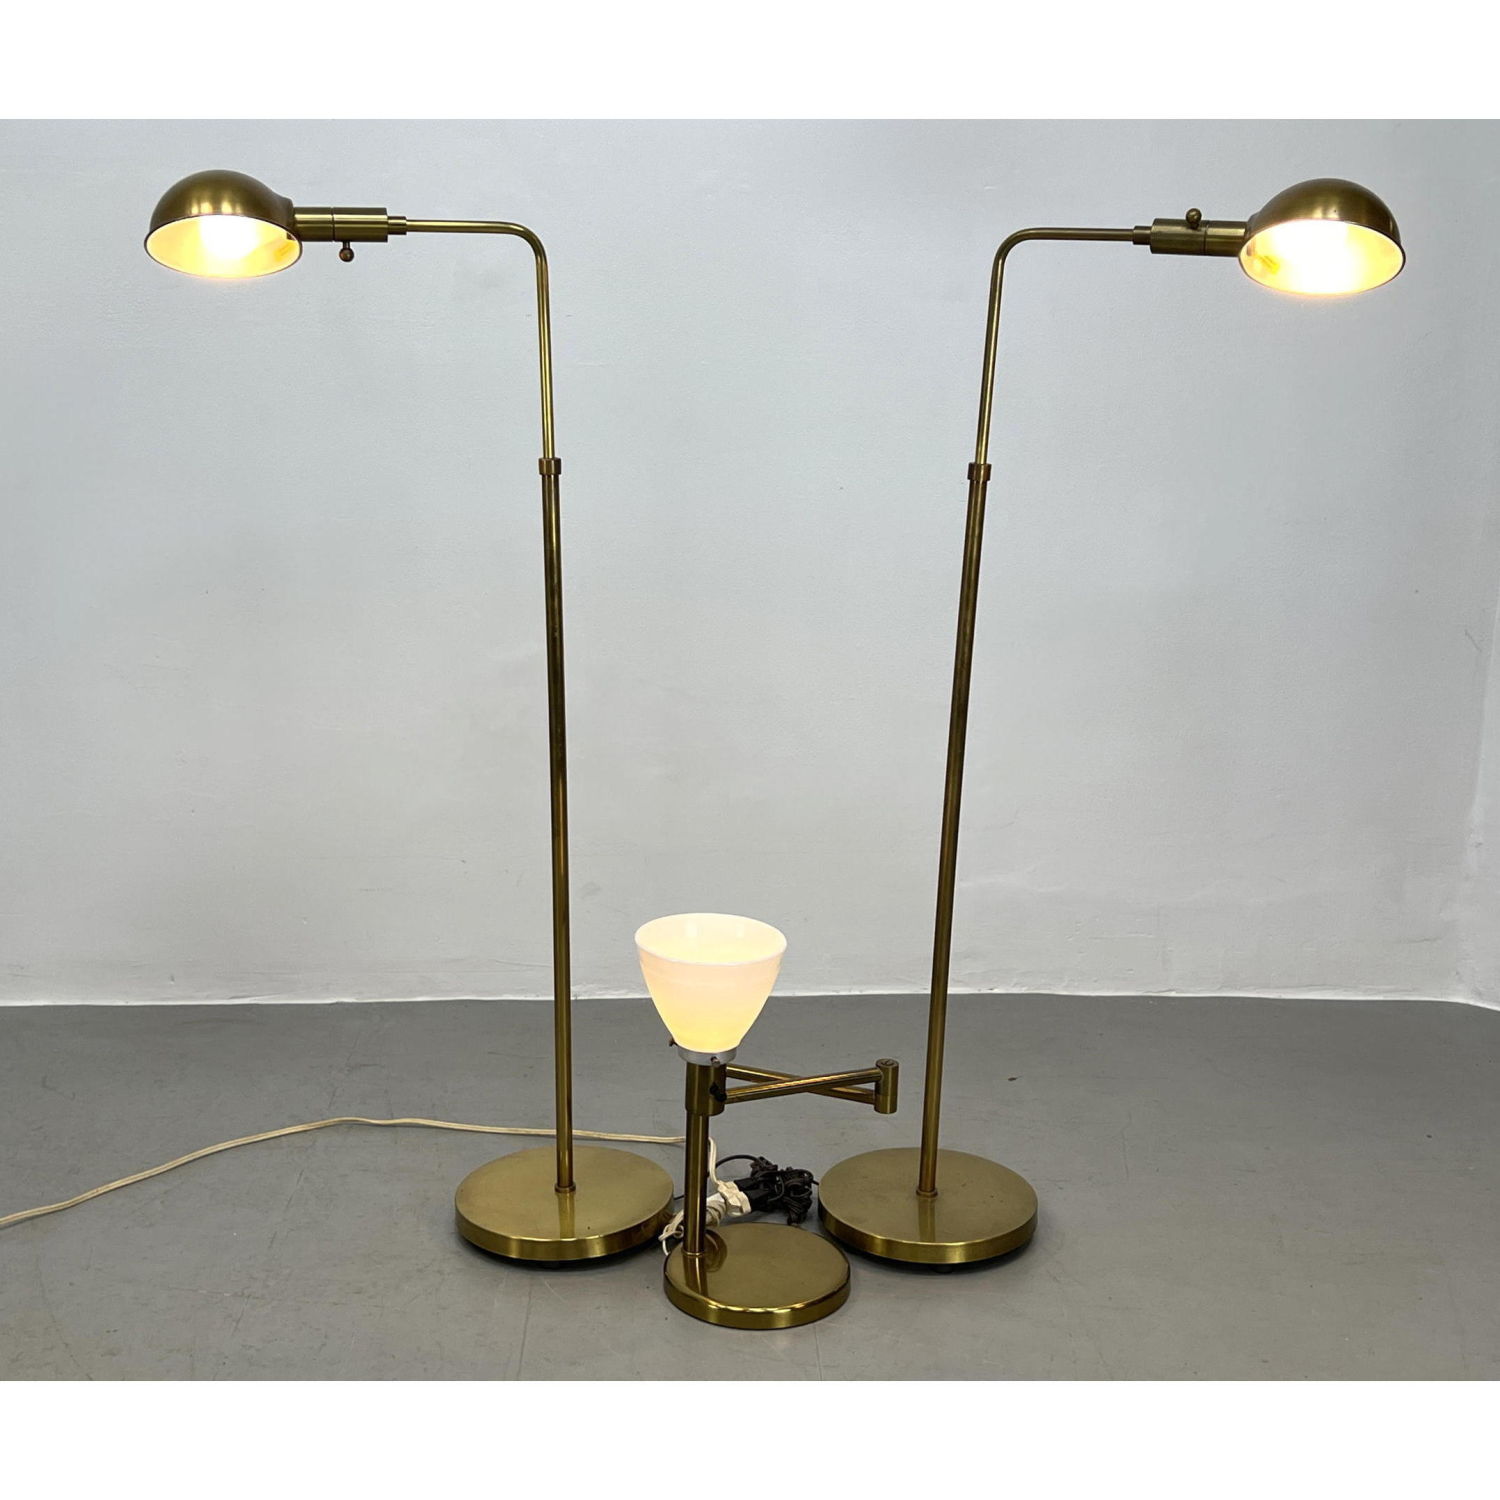 3 Modernist Brass Lamps. Some marked